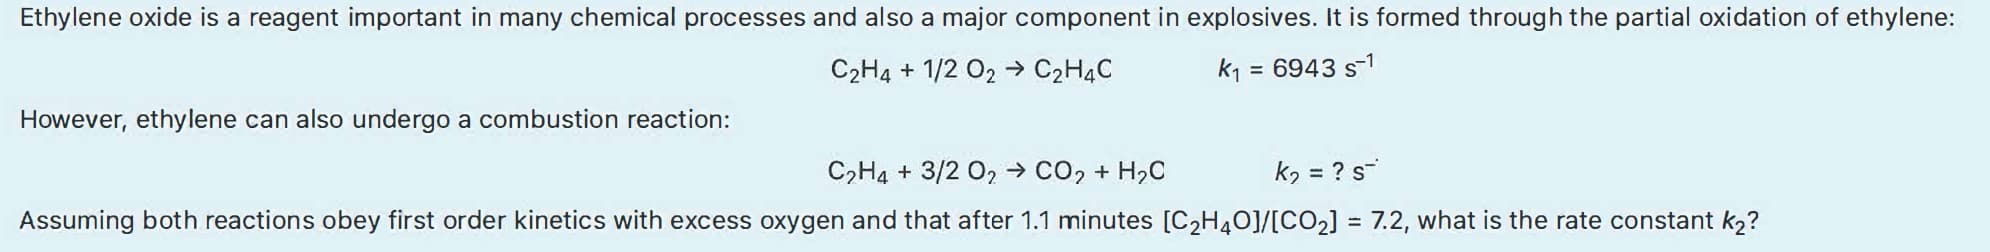 Ethylene oxide is a reagent important in many chemical processes and also a major component in explosives. It is formed through the partial oxidation of ethylene:
C2H4 + 1/2 O2 → C2H4C
k1
= 6943 s-1
However, ethylene can also undergo a combustion reaction:
C,H4 + 3/2 02 → co, + H,C
kɔ = ? s-
Assuming both reactions obey first order kinetics with excess oxygen and that after 1.1 minutes [C2H4O]/[CO2] = 7.2, what is the rate constant k2?
%3D
